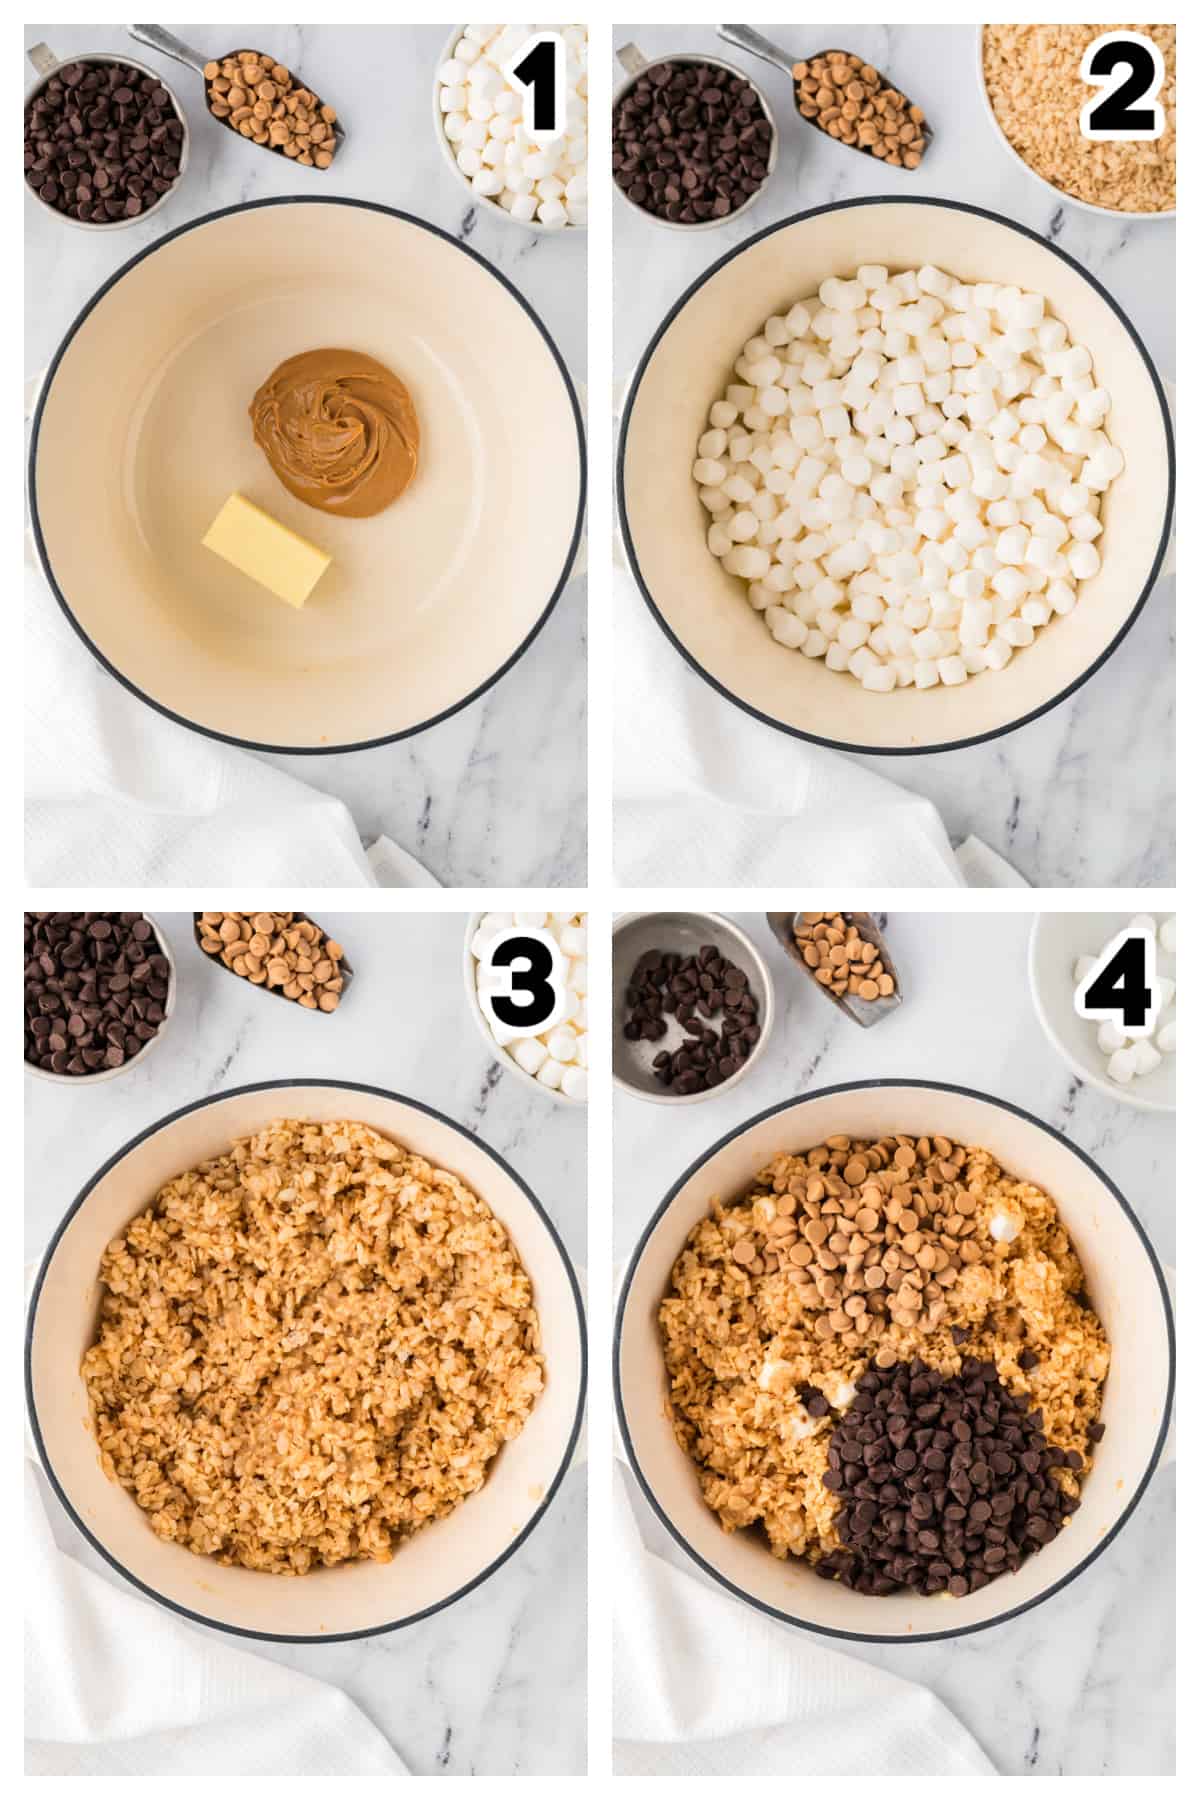 Collage showing how to make rice krispie treats with chocolate and peanut butter.